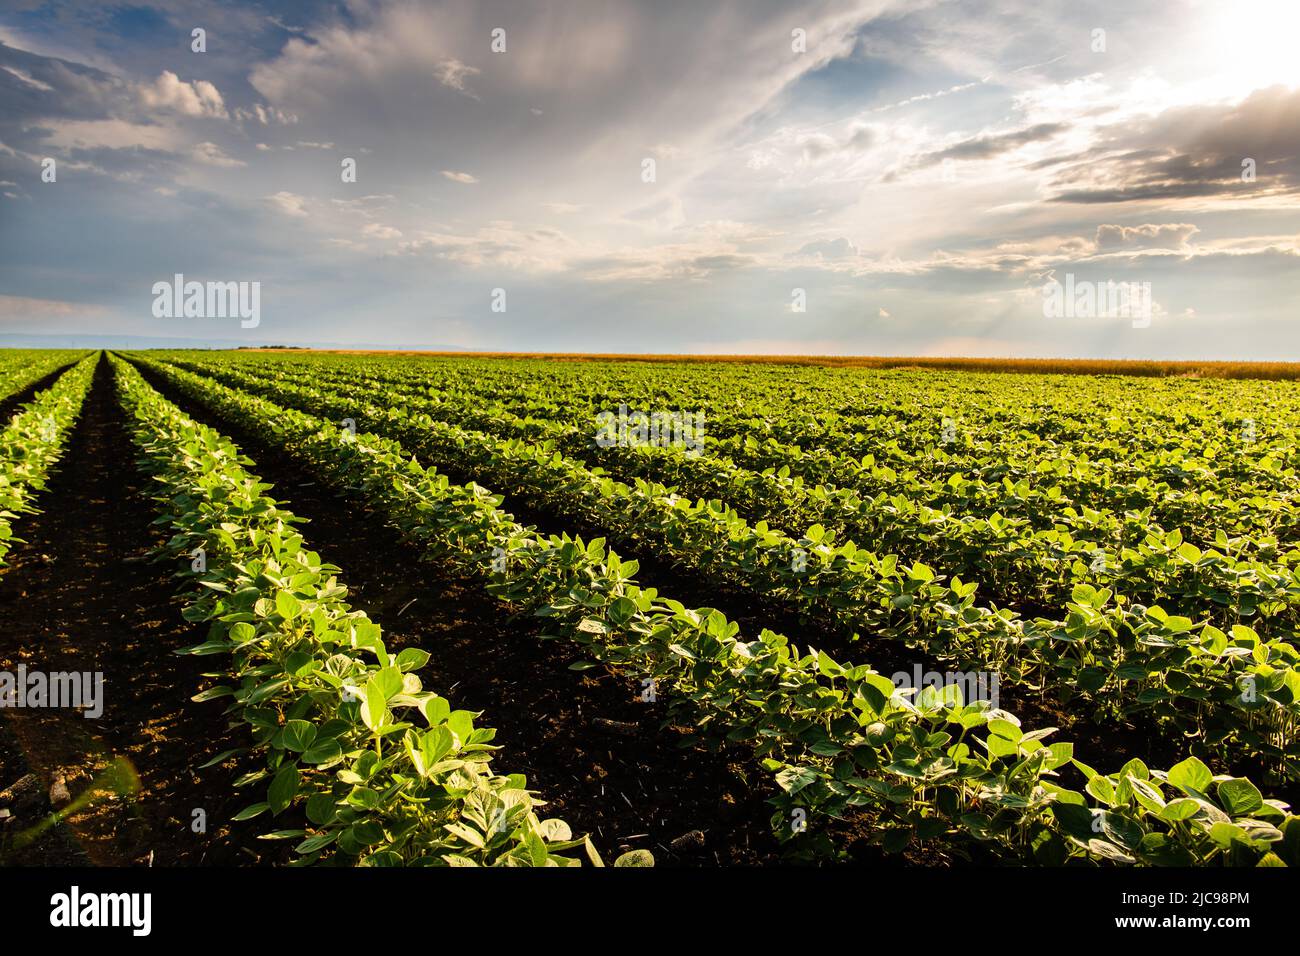 Sunset over growing soybean plants at ranch field Stock Photo